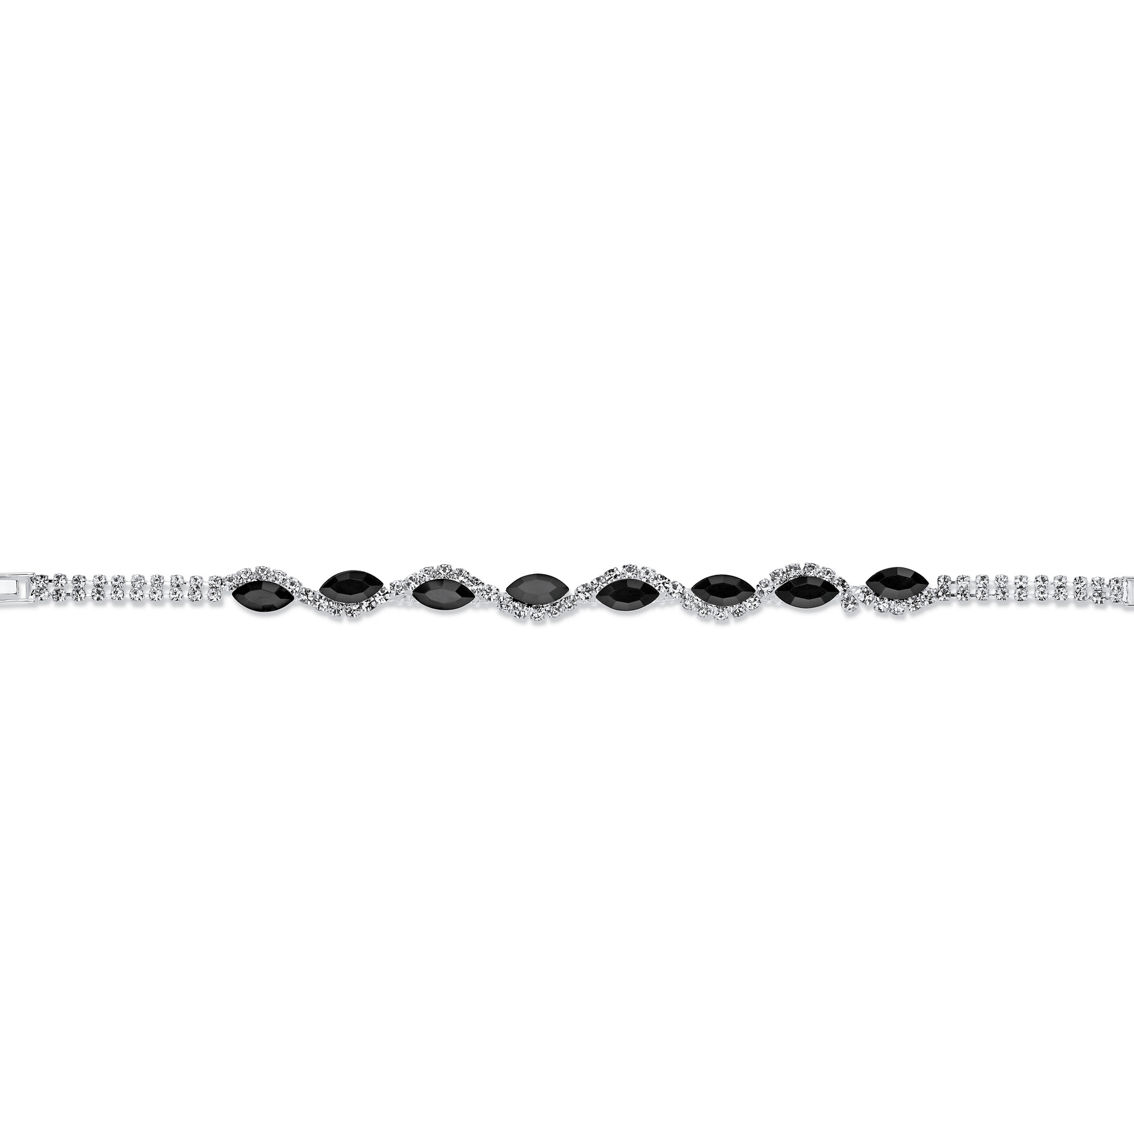 PalmBeach lack and White Crystal Twisted Strand Bracelet in Silvertone 7in - Image 4 of 5